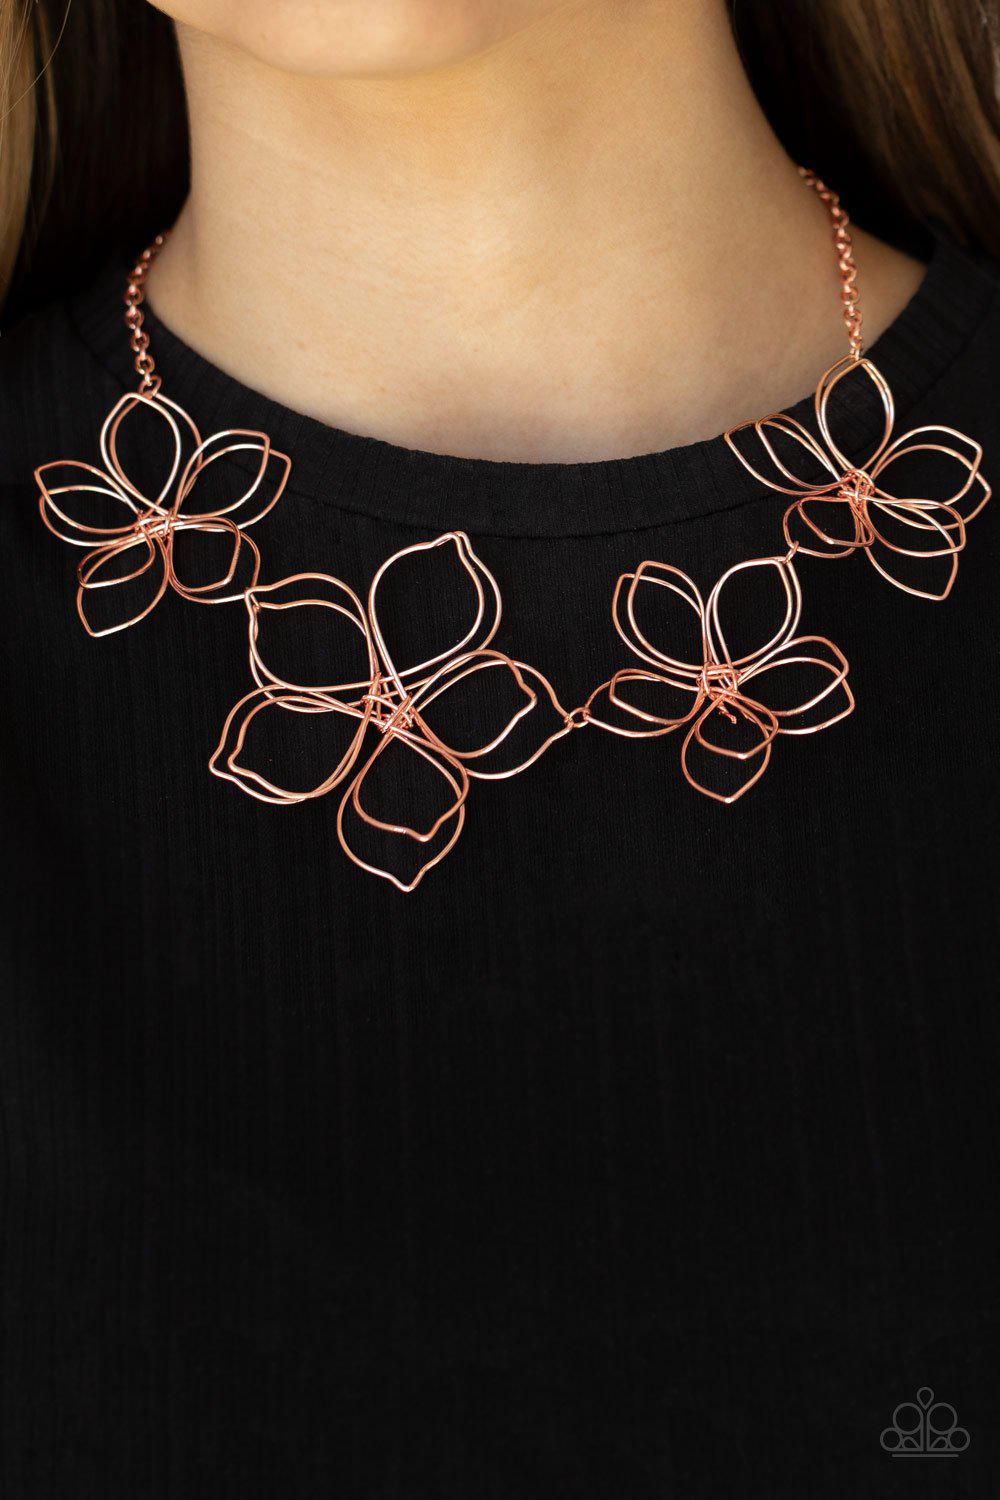 Flower Garden Fashionista Copper Wire Flower Necklace - Paparazzi Accessories 2021 Convention Exclusive- model - CarasShop.com - $5 Jewelry by Cara Jewels